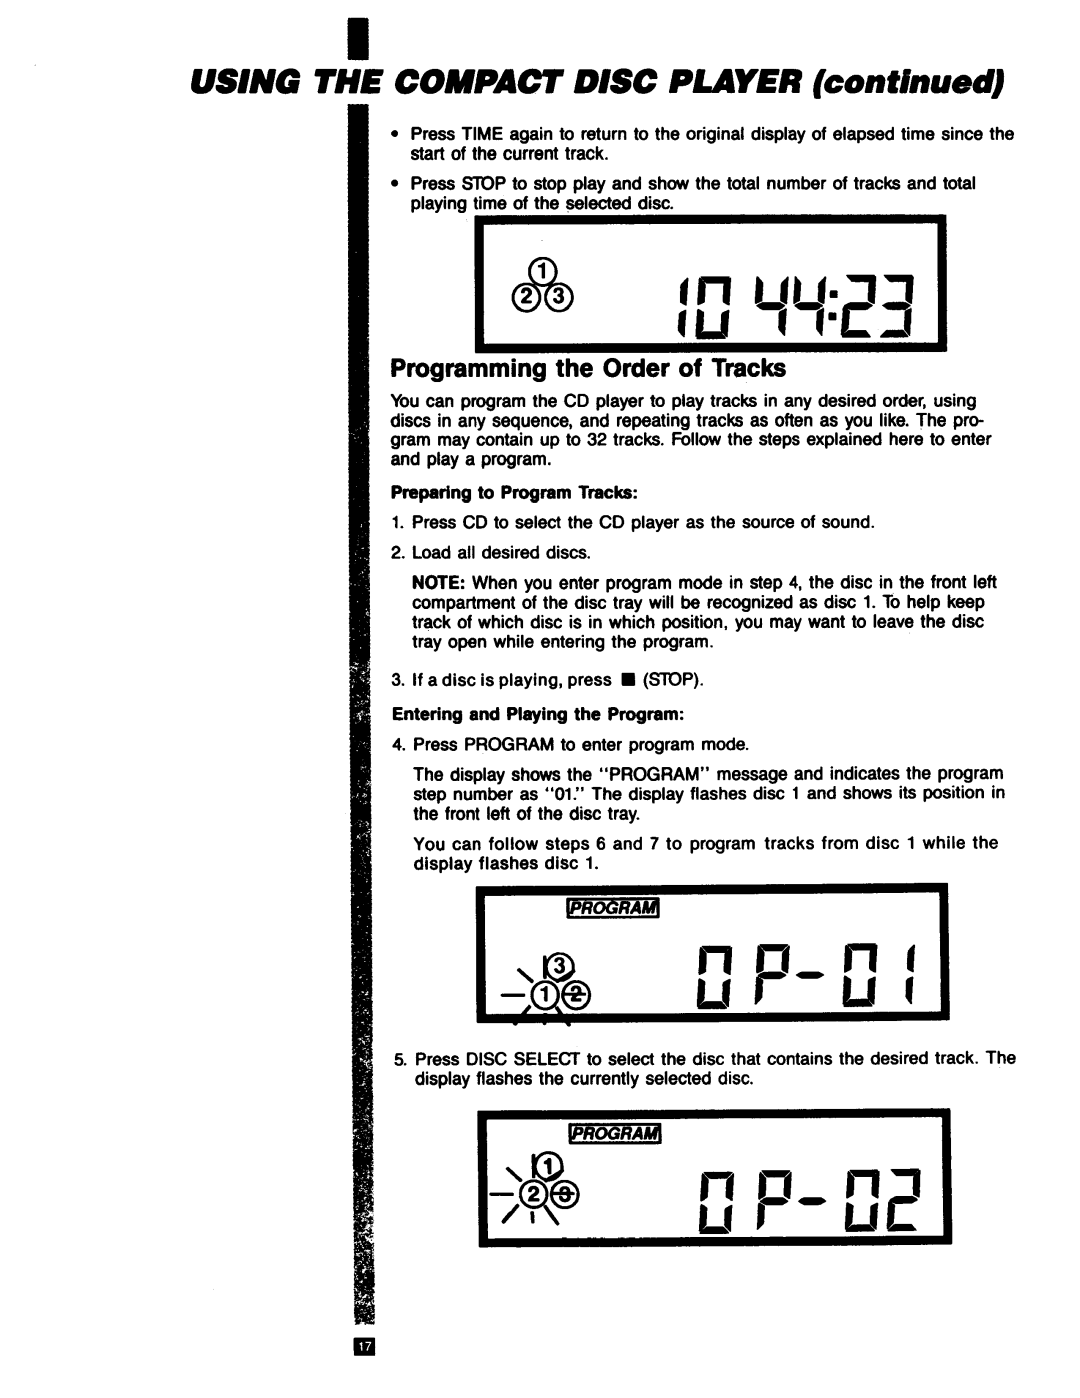 RCA RP-9753 manual USING THE COMPACT DISC PLAYER lcontinuedl, Programming the Order of Tracks 